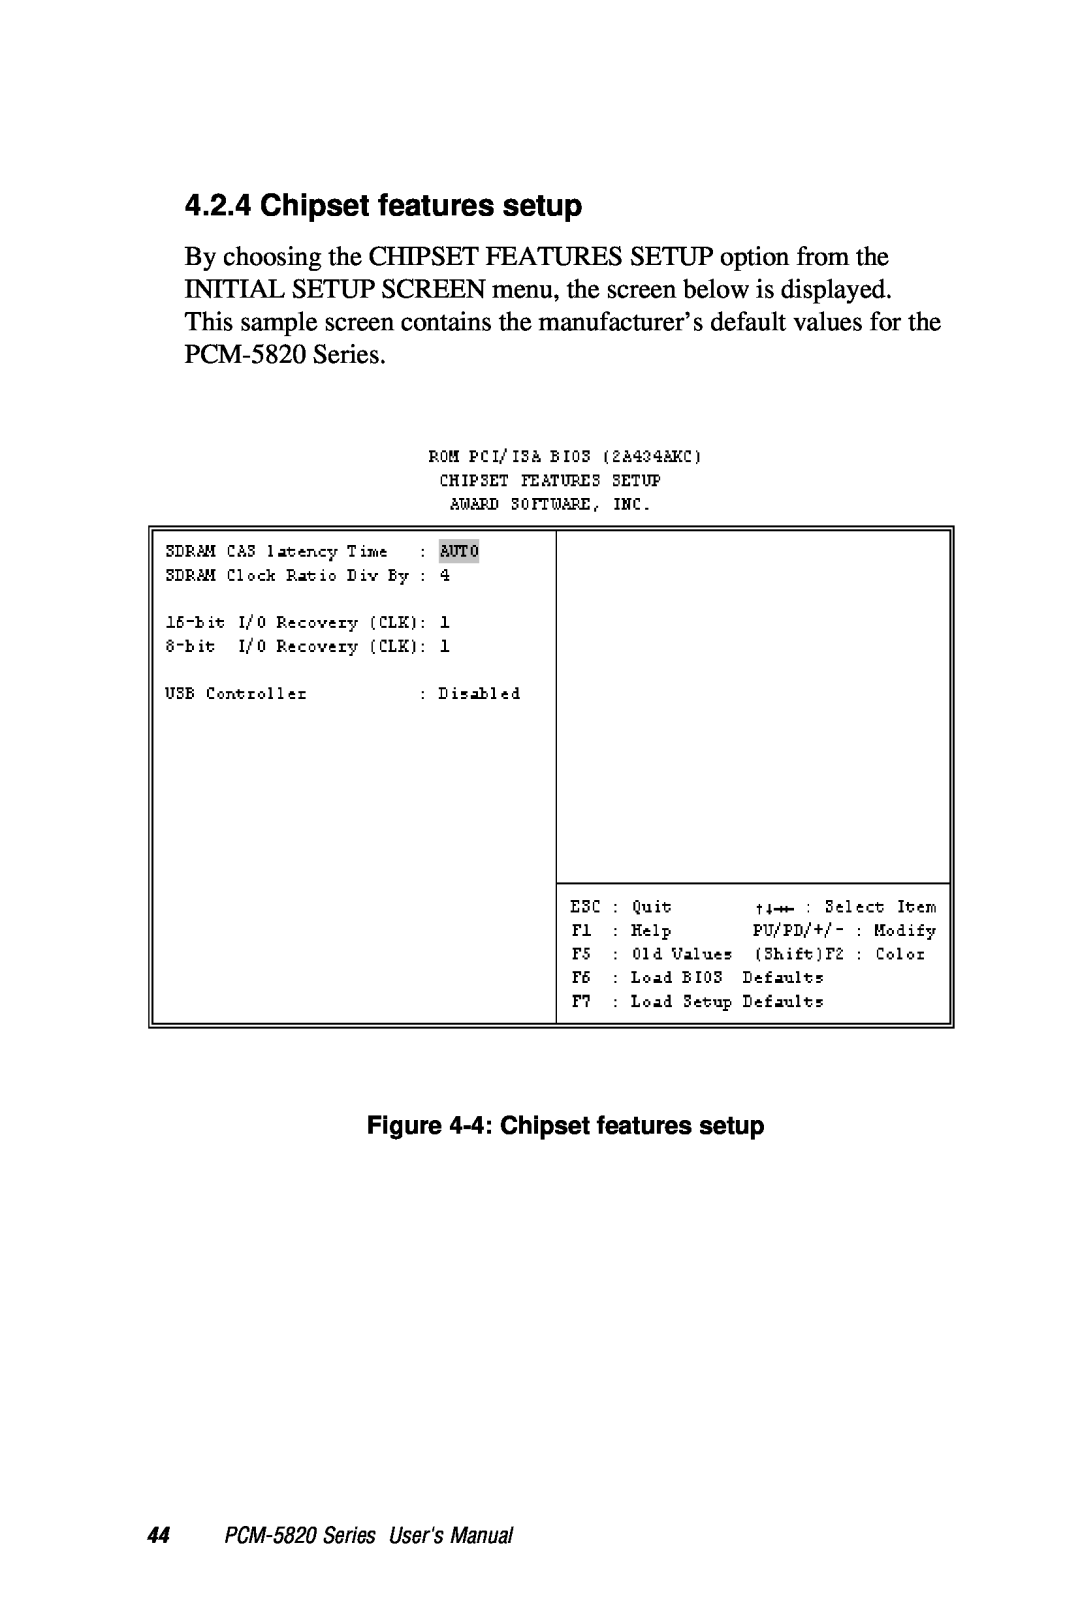 AMD manual 4 Chipset features setup, PCM-5820 Series Users Manual 